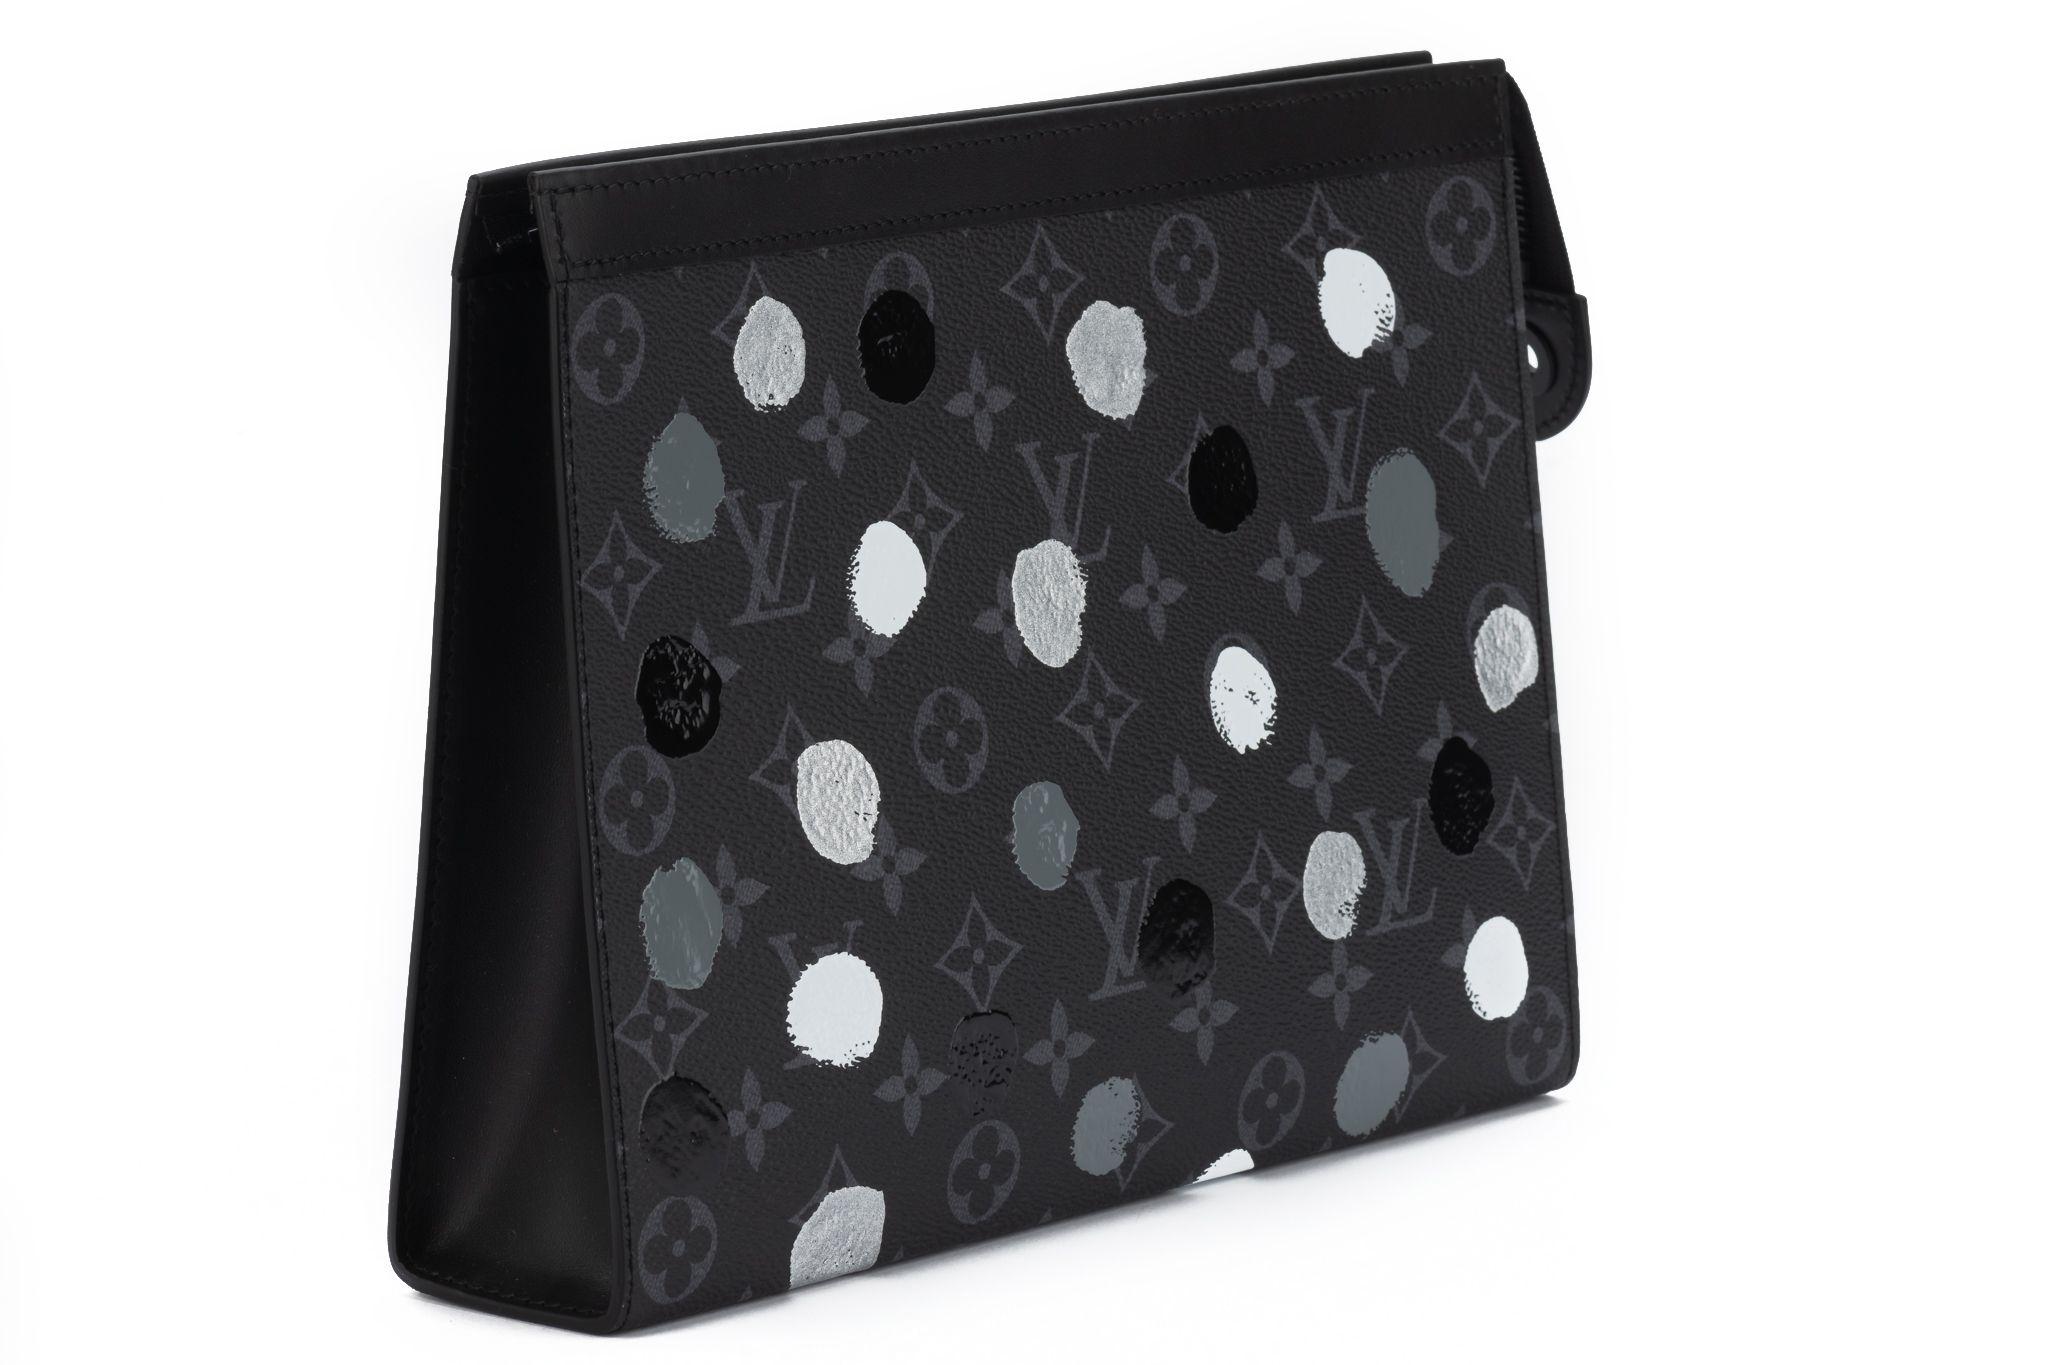 Louis Vuitton x Yayoi Kusama Pochette Voyage features a gray-scale interpretation of the artists hand-painted dots. Bag is brand new and comes with the box and dustcover.